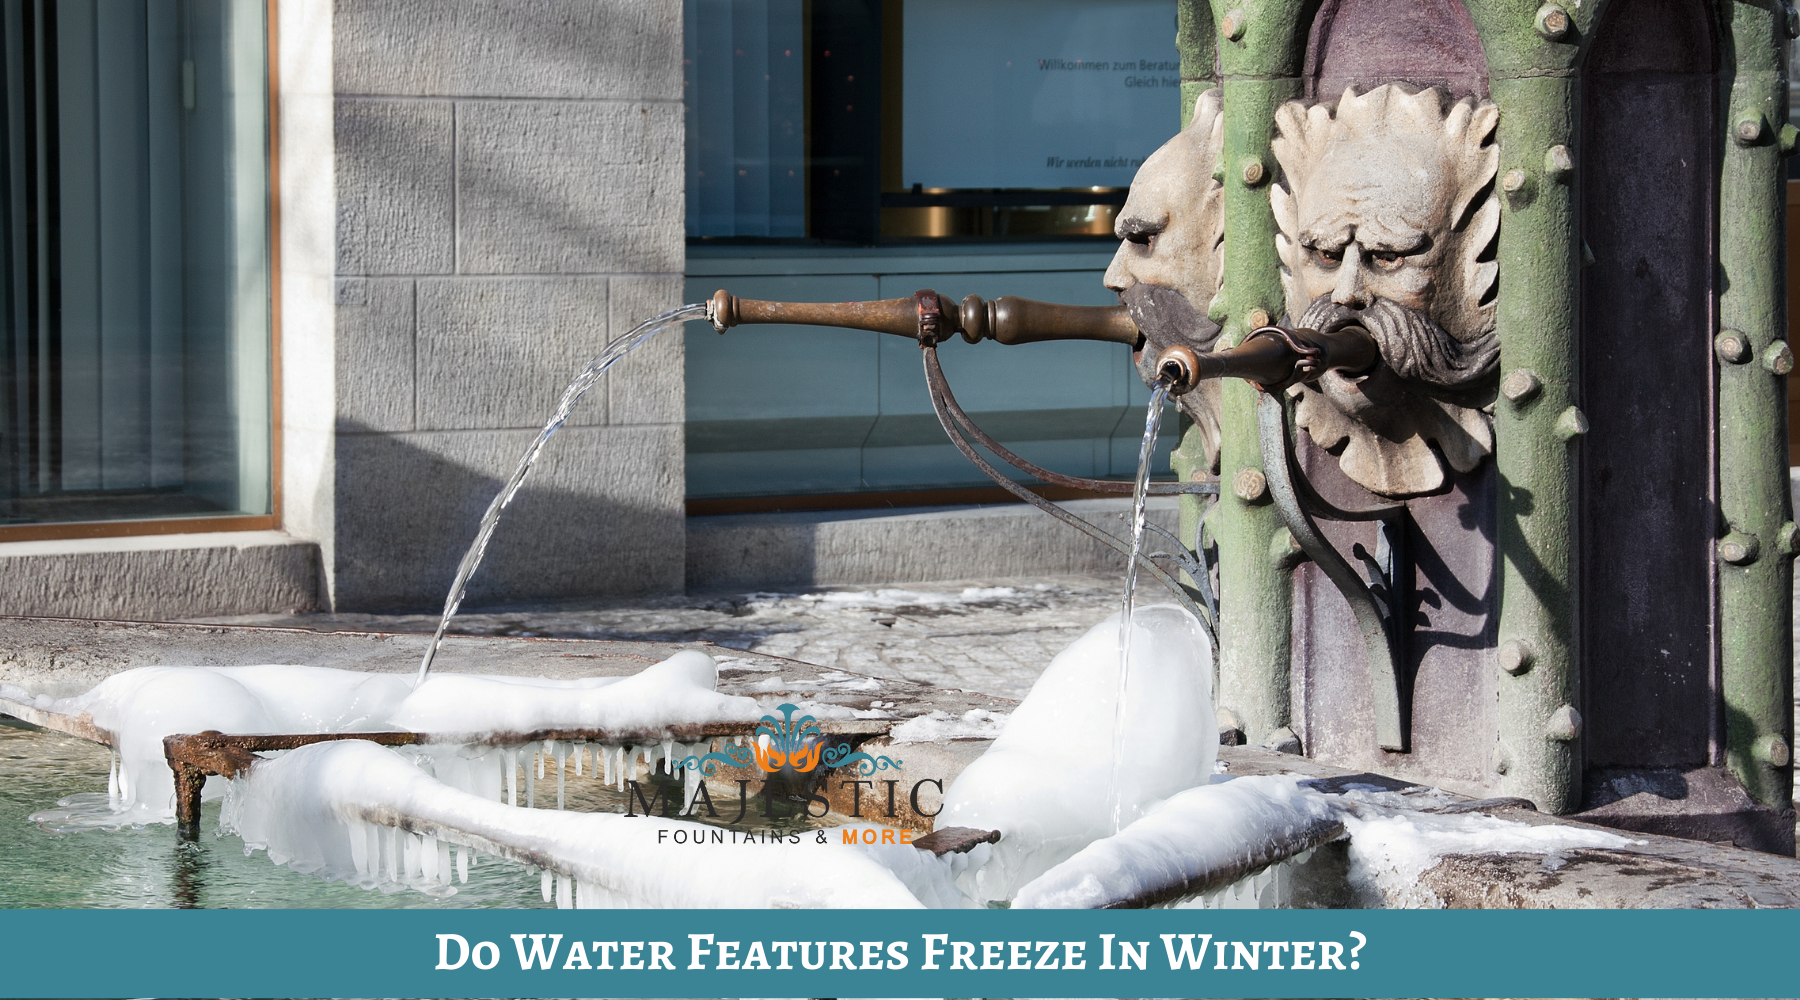 Do Water Features Freeze In Winter?